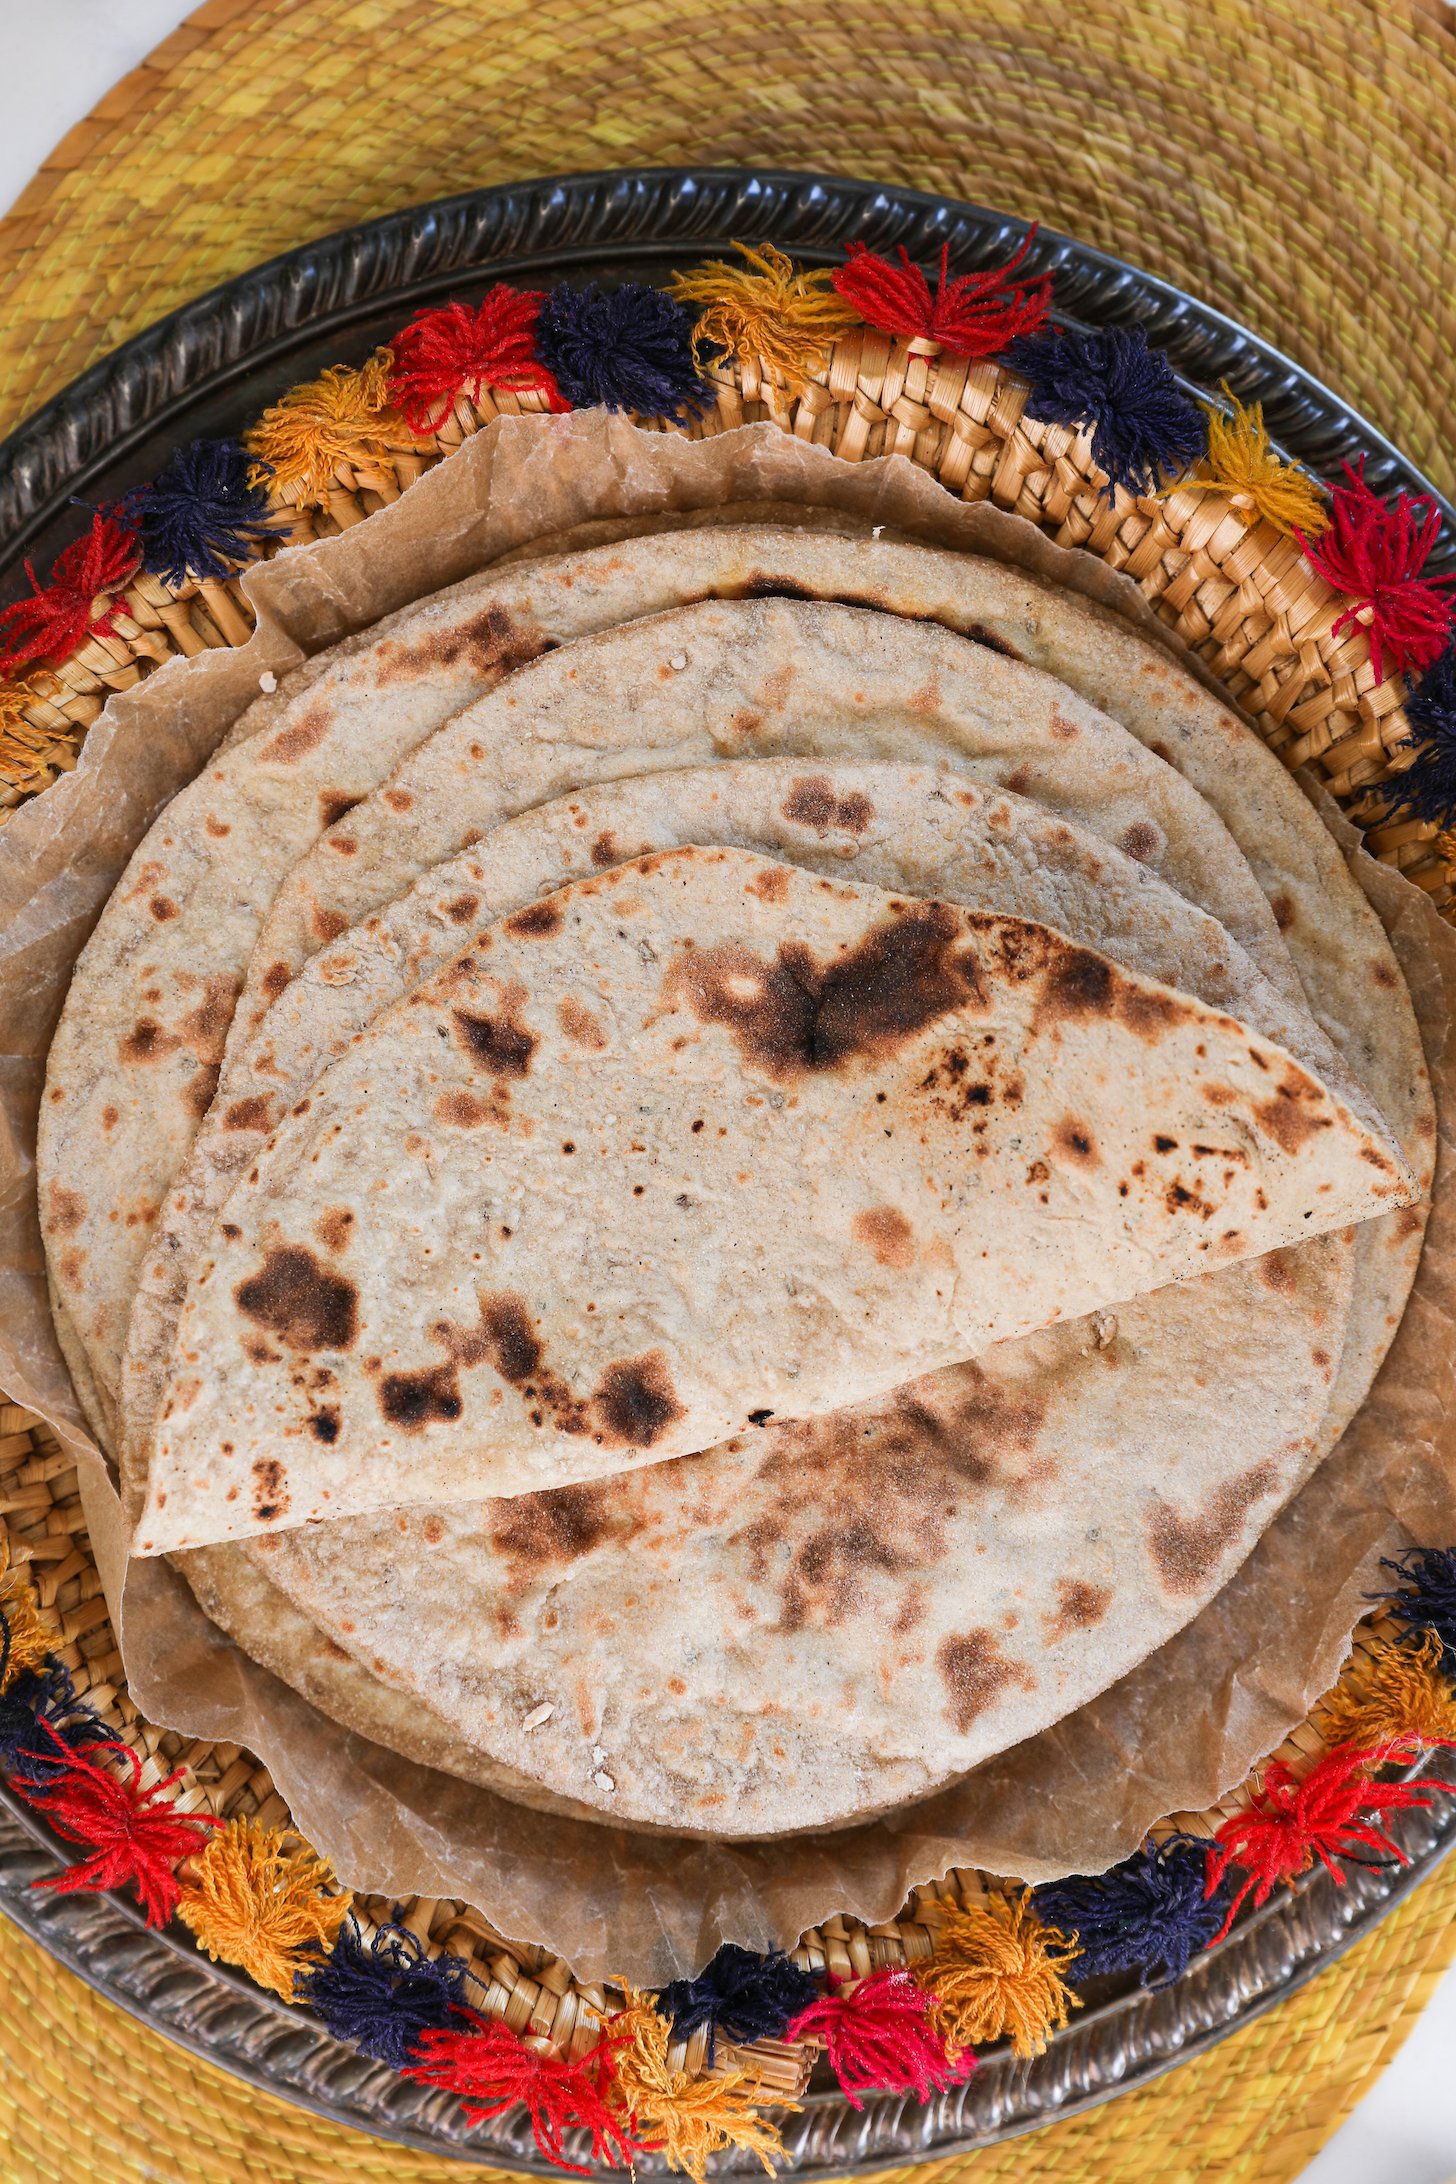 Flatlay of a pile of rotis with the top one folded styled on a decorative plate.